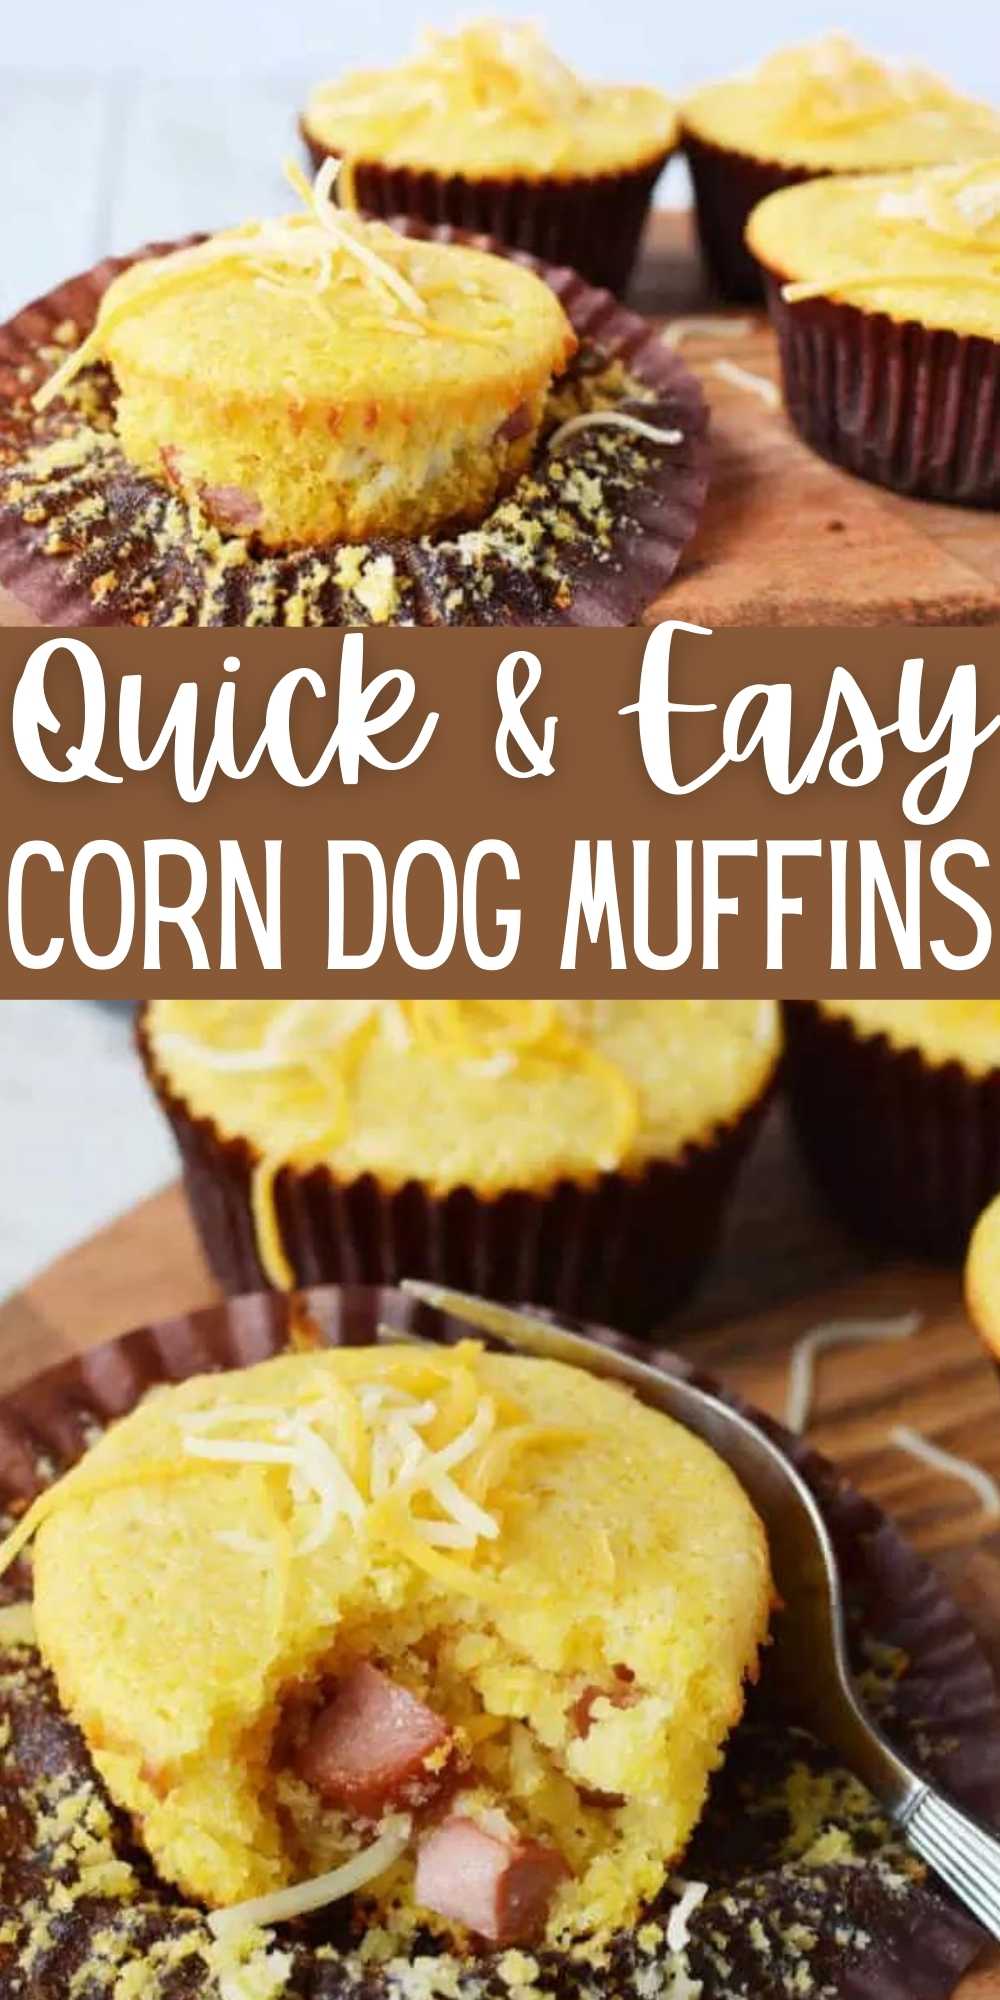 Make these frugal Corn Dog Muffins for dinner, game day and more. They are kid friendly but everyone will enjoy them. Try this homemade Mini Corn Dog muffins recipe with a Jiffy mix so you know it’s easy to make too!  #eatingonadime #appetizerrecipes #snackrecipes #lunchrecipes 
